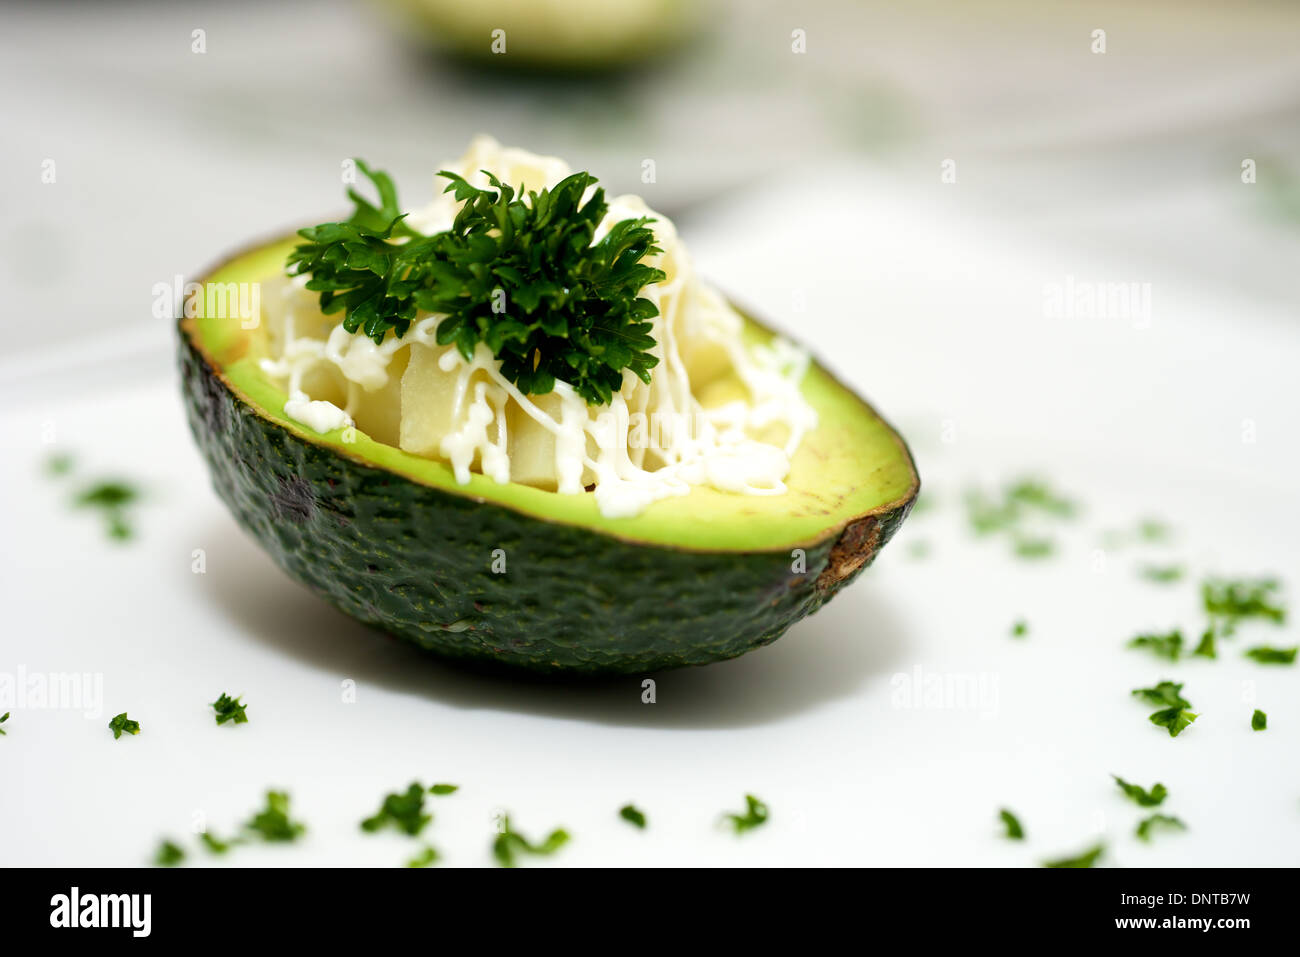 Beautiful avocado and vegetables in the plate Stock Photo